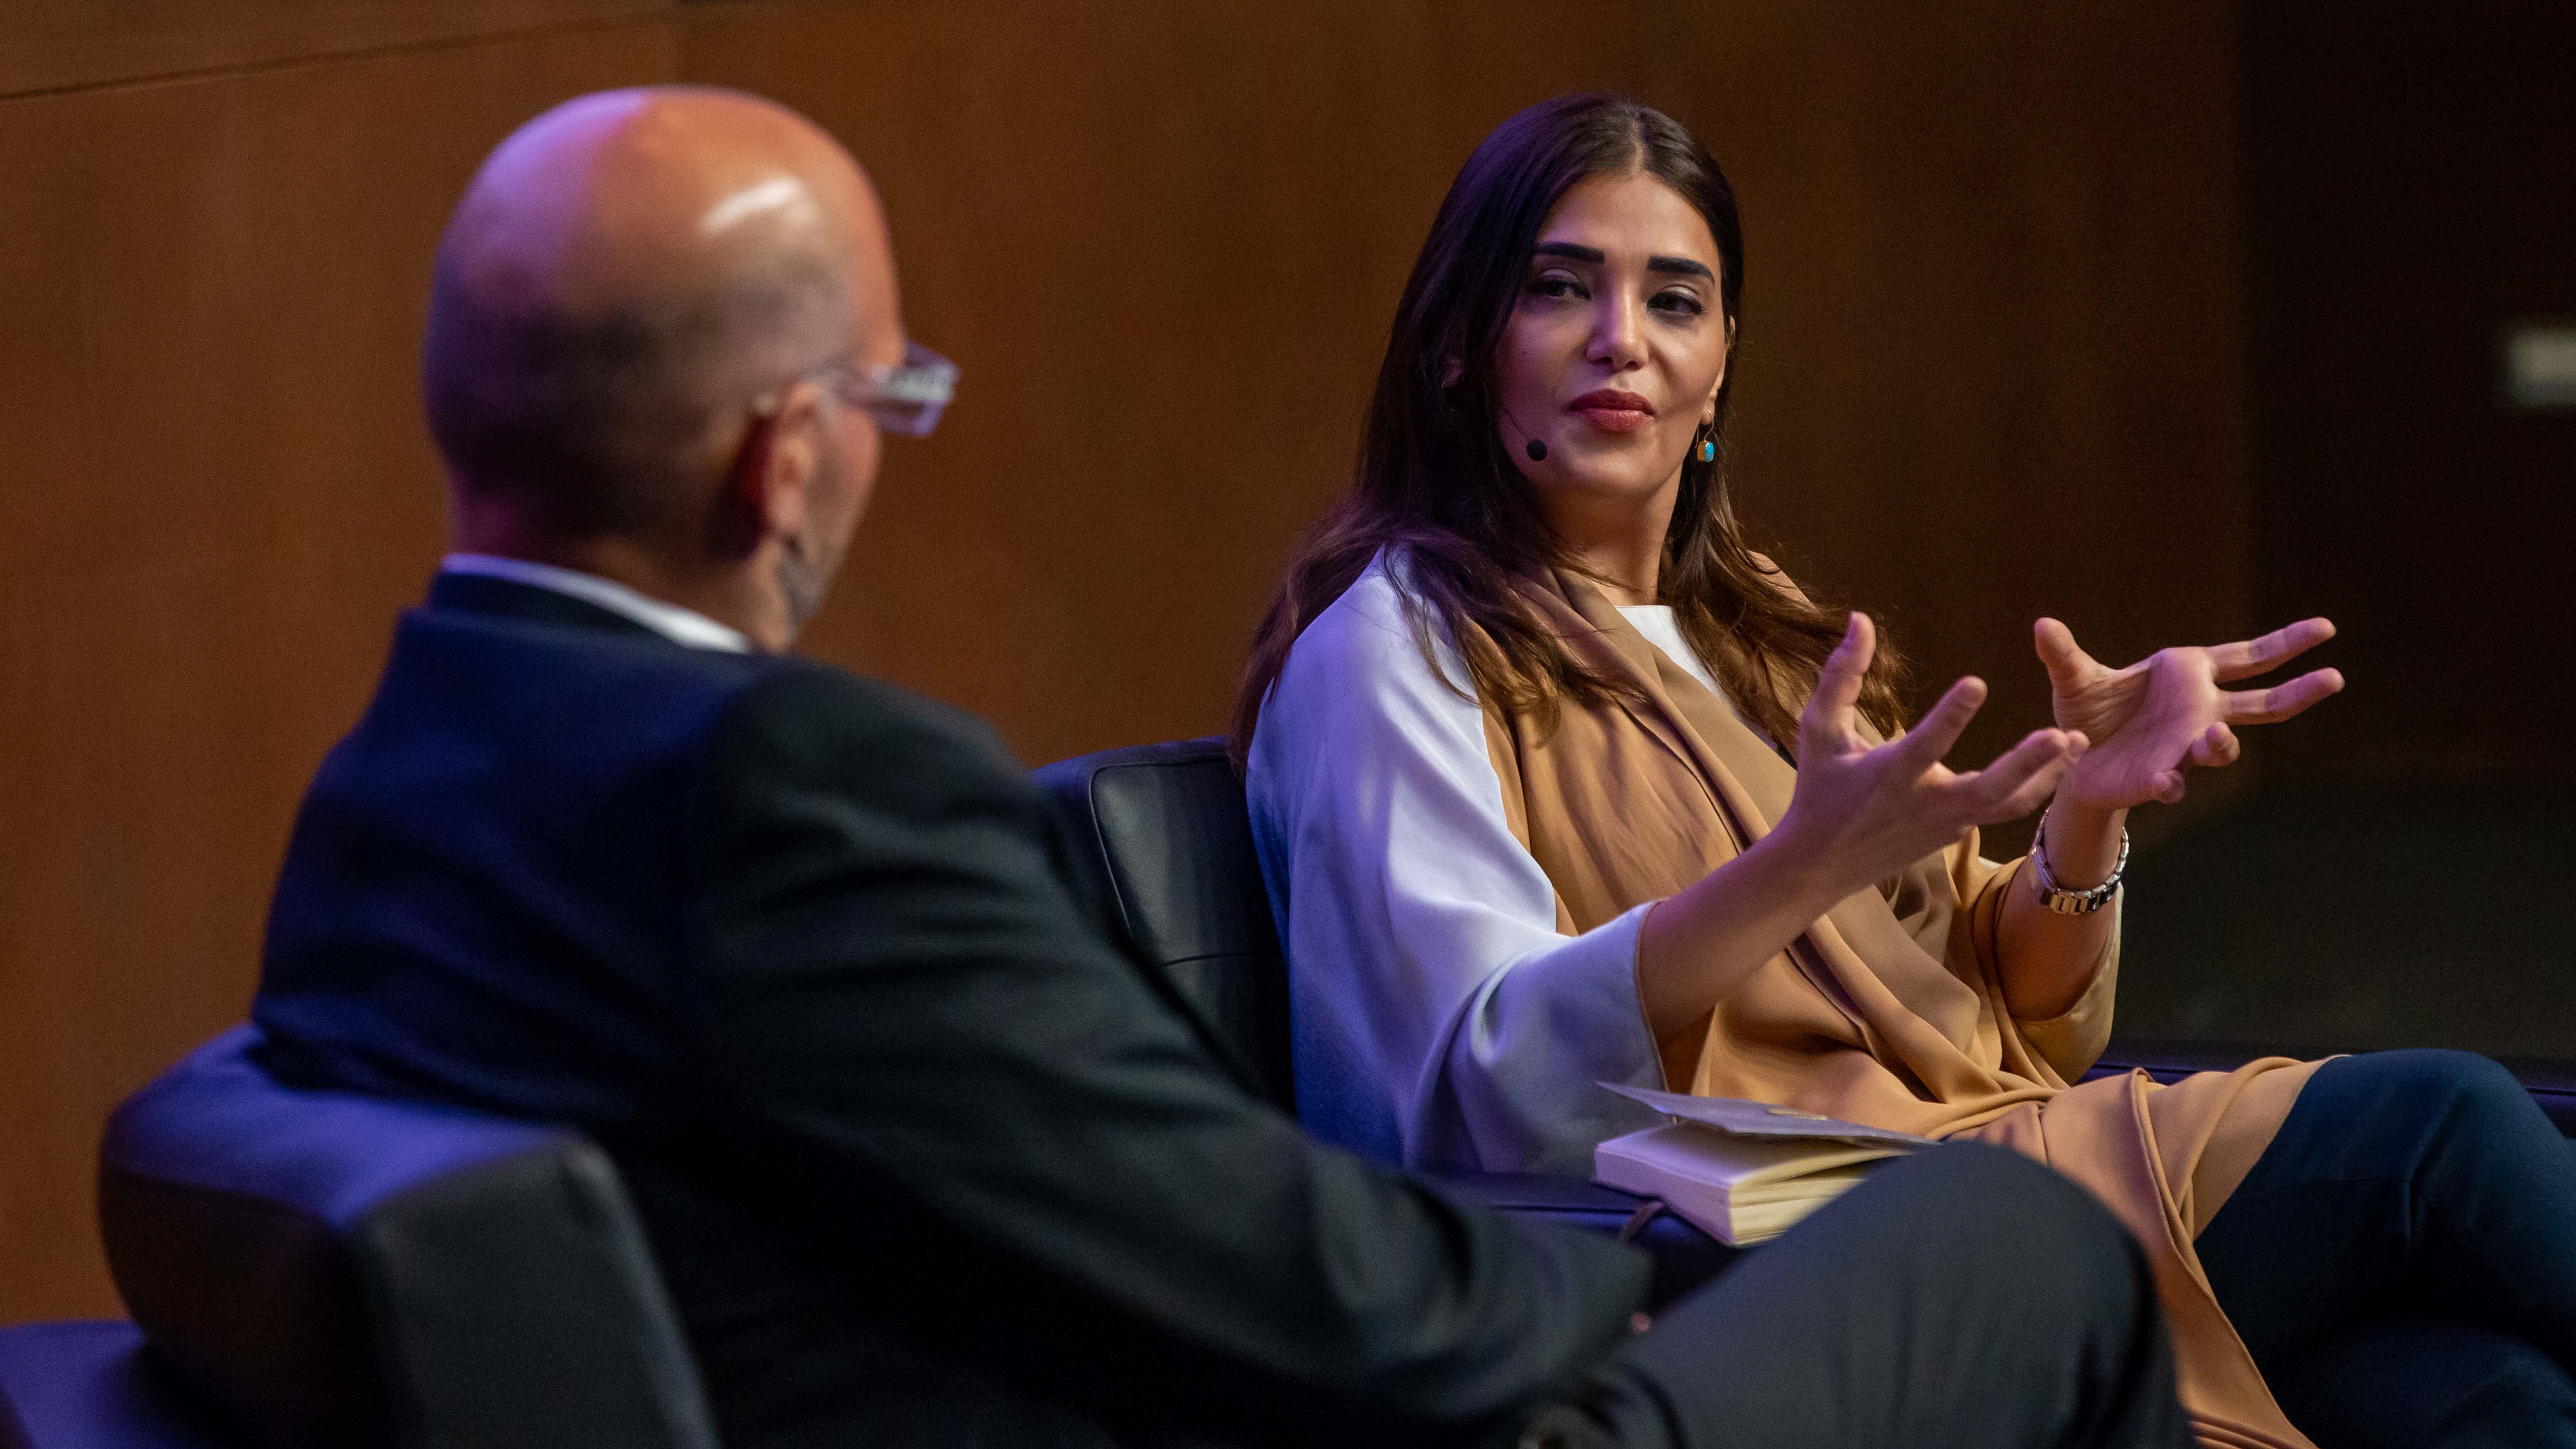 Amal Al-Malki discussed her personal and professional trajectory and the role of Arab women in the public eye at the annual Dean’s Global Forum.